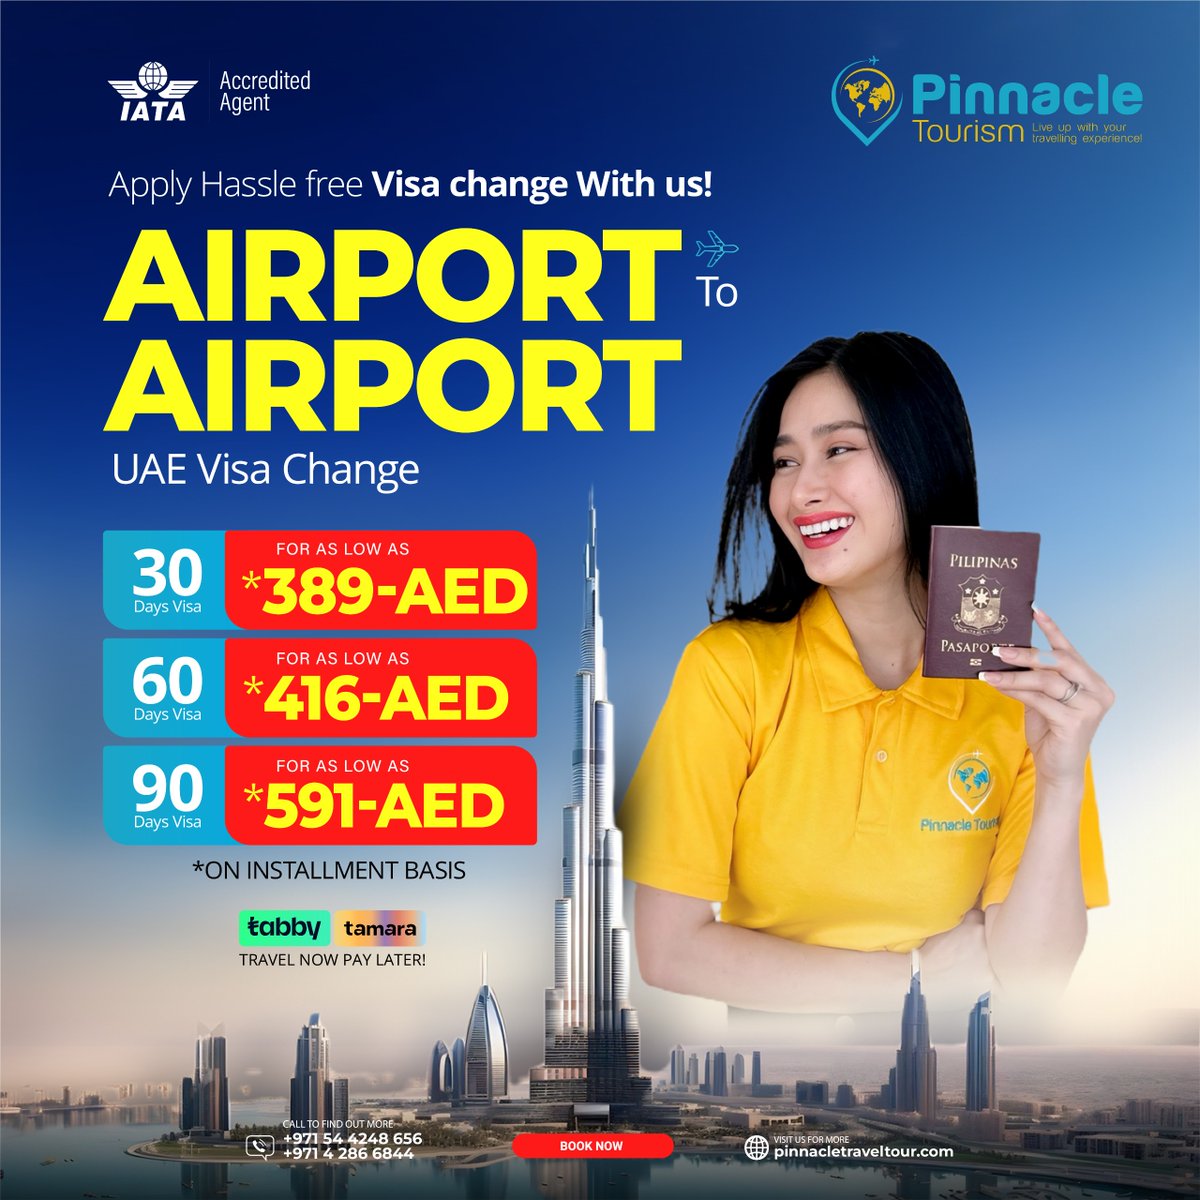 Ready for a hassle-free visa change? ✈️✨ Pinnacle Tourism offers seamless Airport to Airport Visa change services! 

☎️042866844
📲0544248656
📧inquiries@pinnacletraveltour.com

#PinnacleTourism #VisaChange #AirportToAirport #SeamlessProcess #TravelConvenience #VisaServices